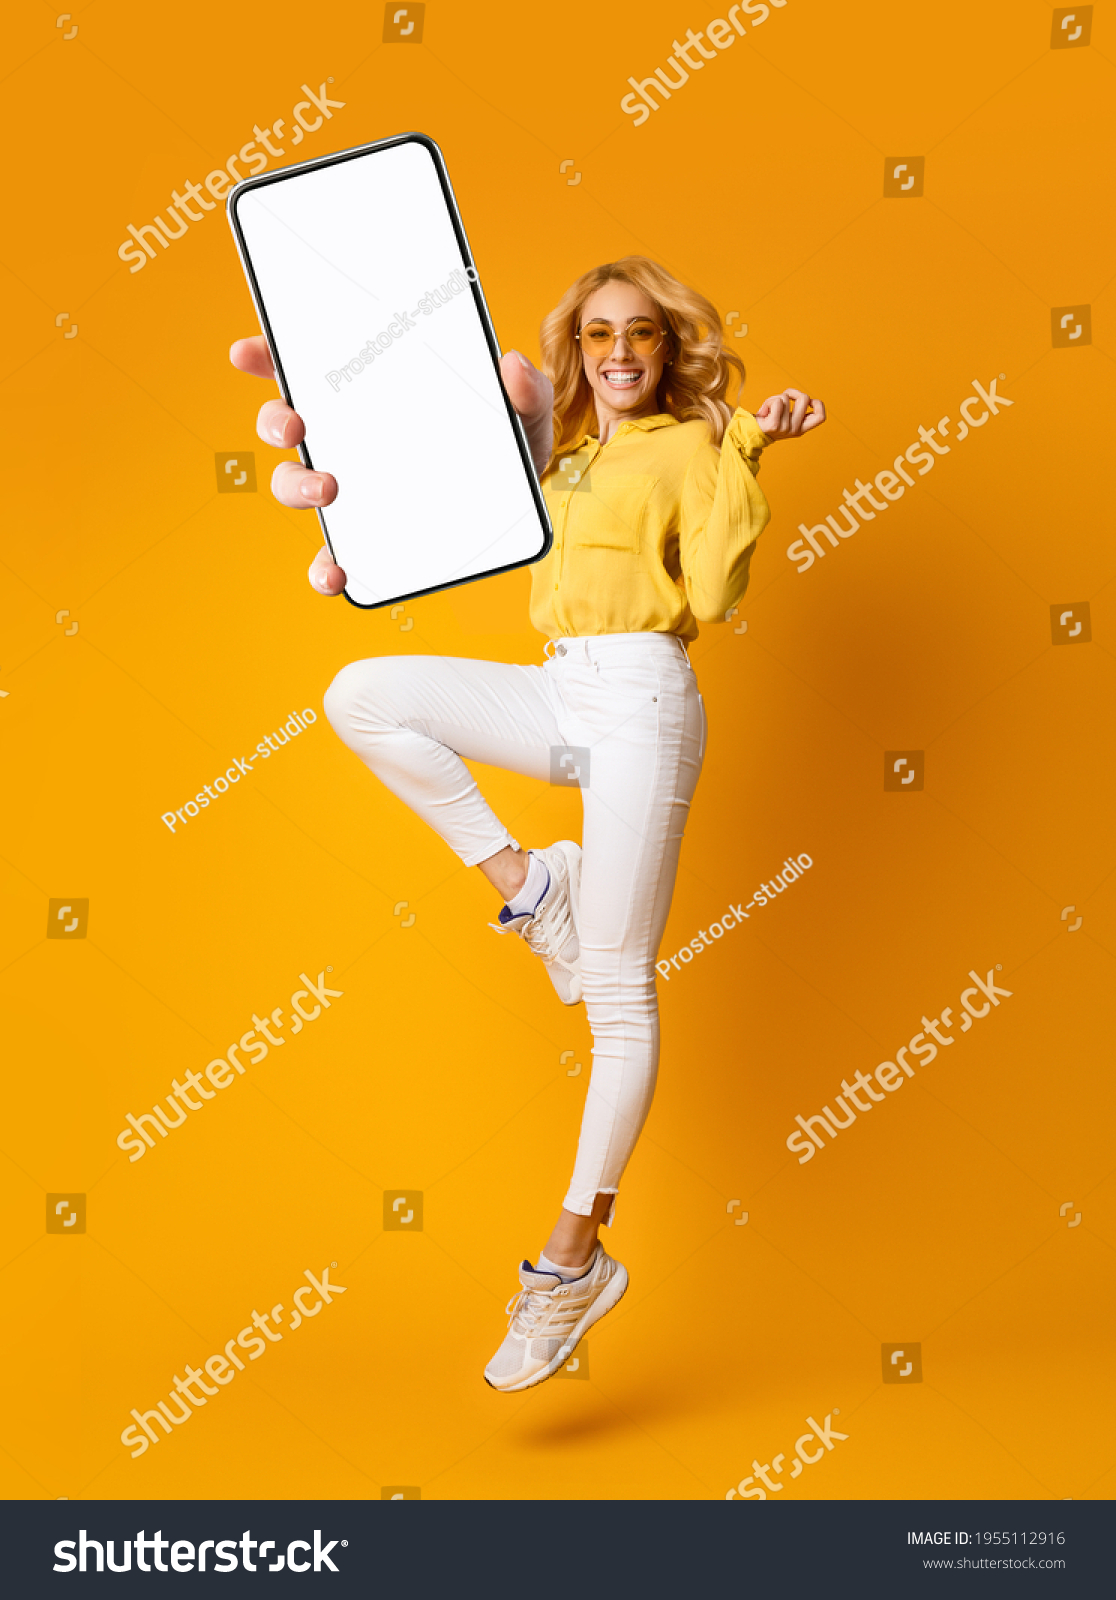 Cheerful blonde woman jumping up and showing newest smartphone with empty screen, enjoying new application for mobile device. Orange studio background, creative collage with mockup #1955112916